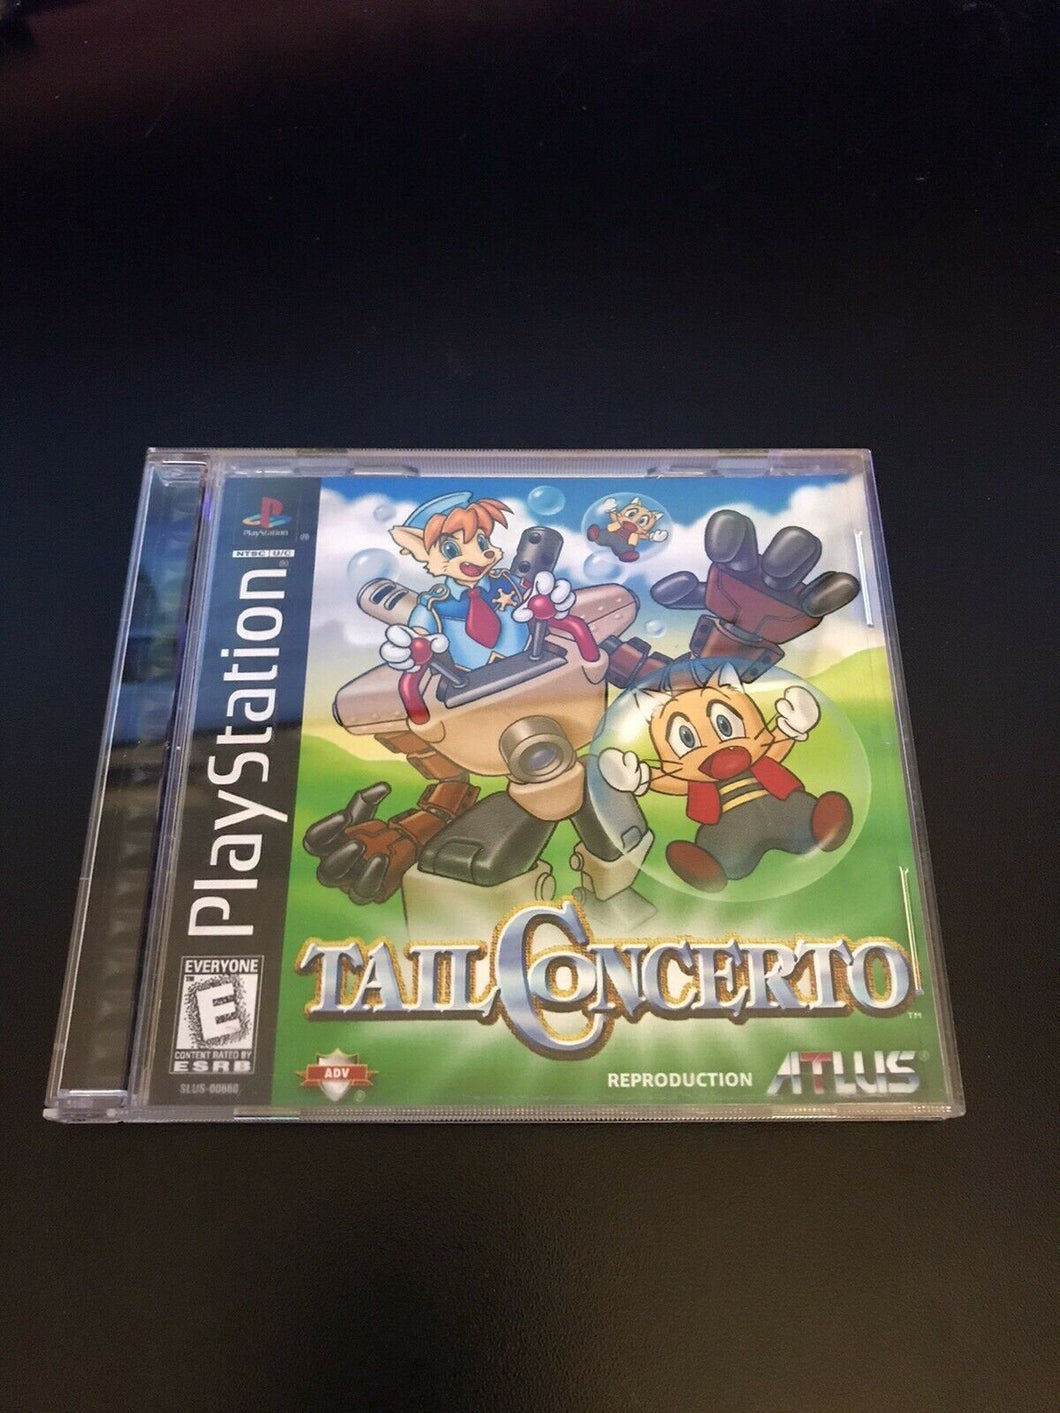 Tail Concerto PS1 RPG Reproduction Case